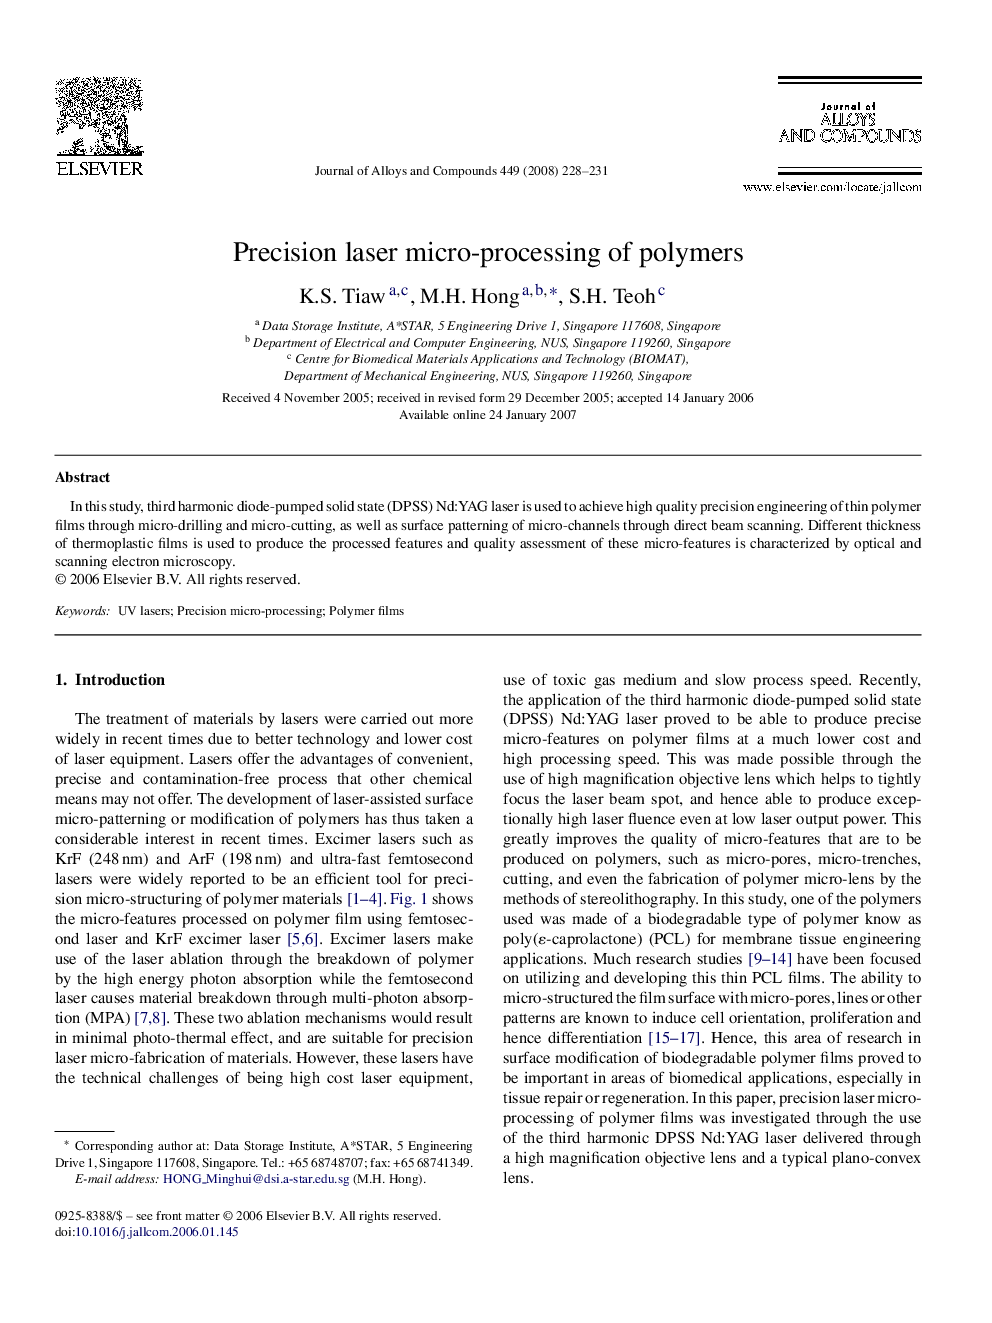 Precision laser micro-processing of polymers